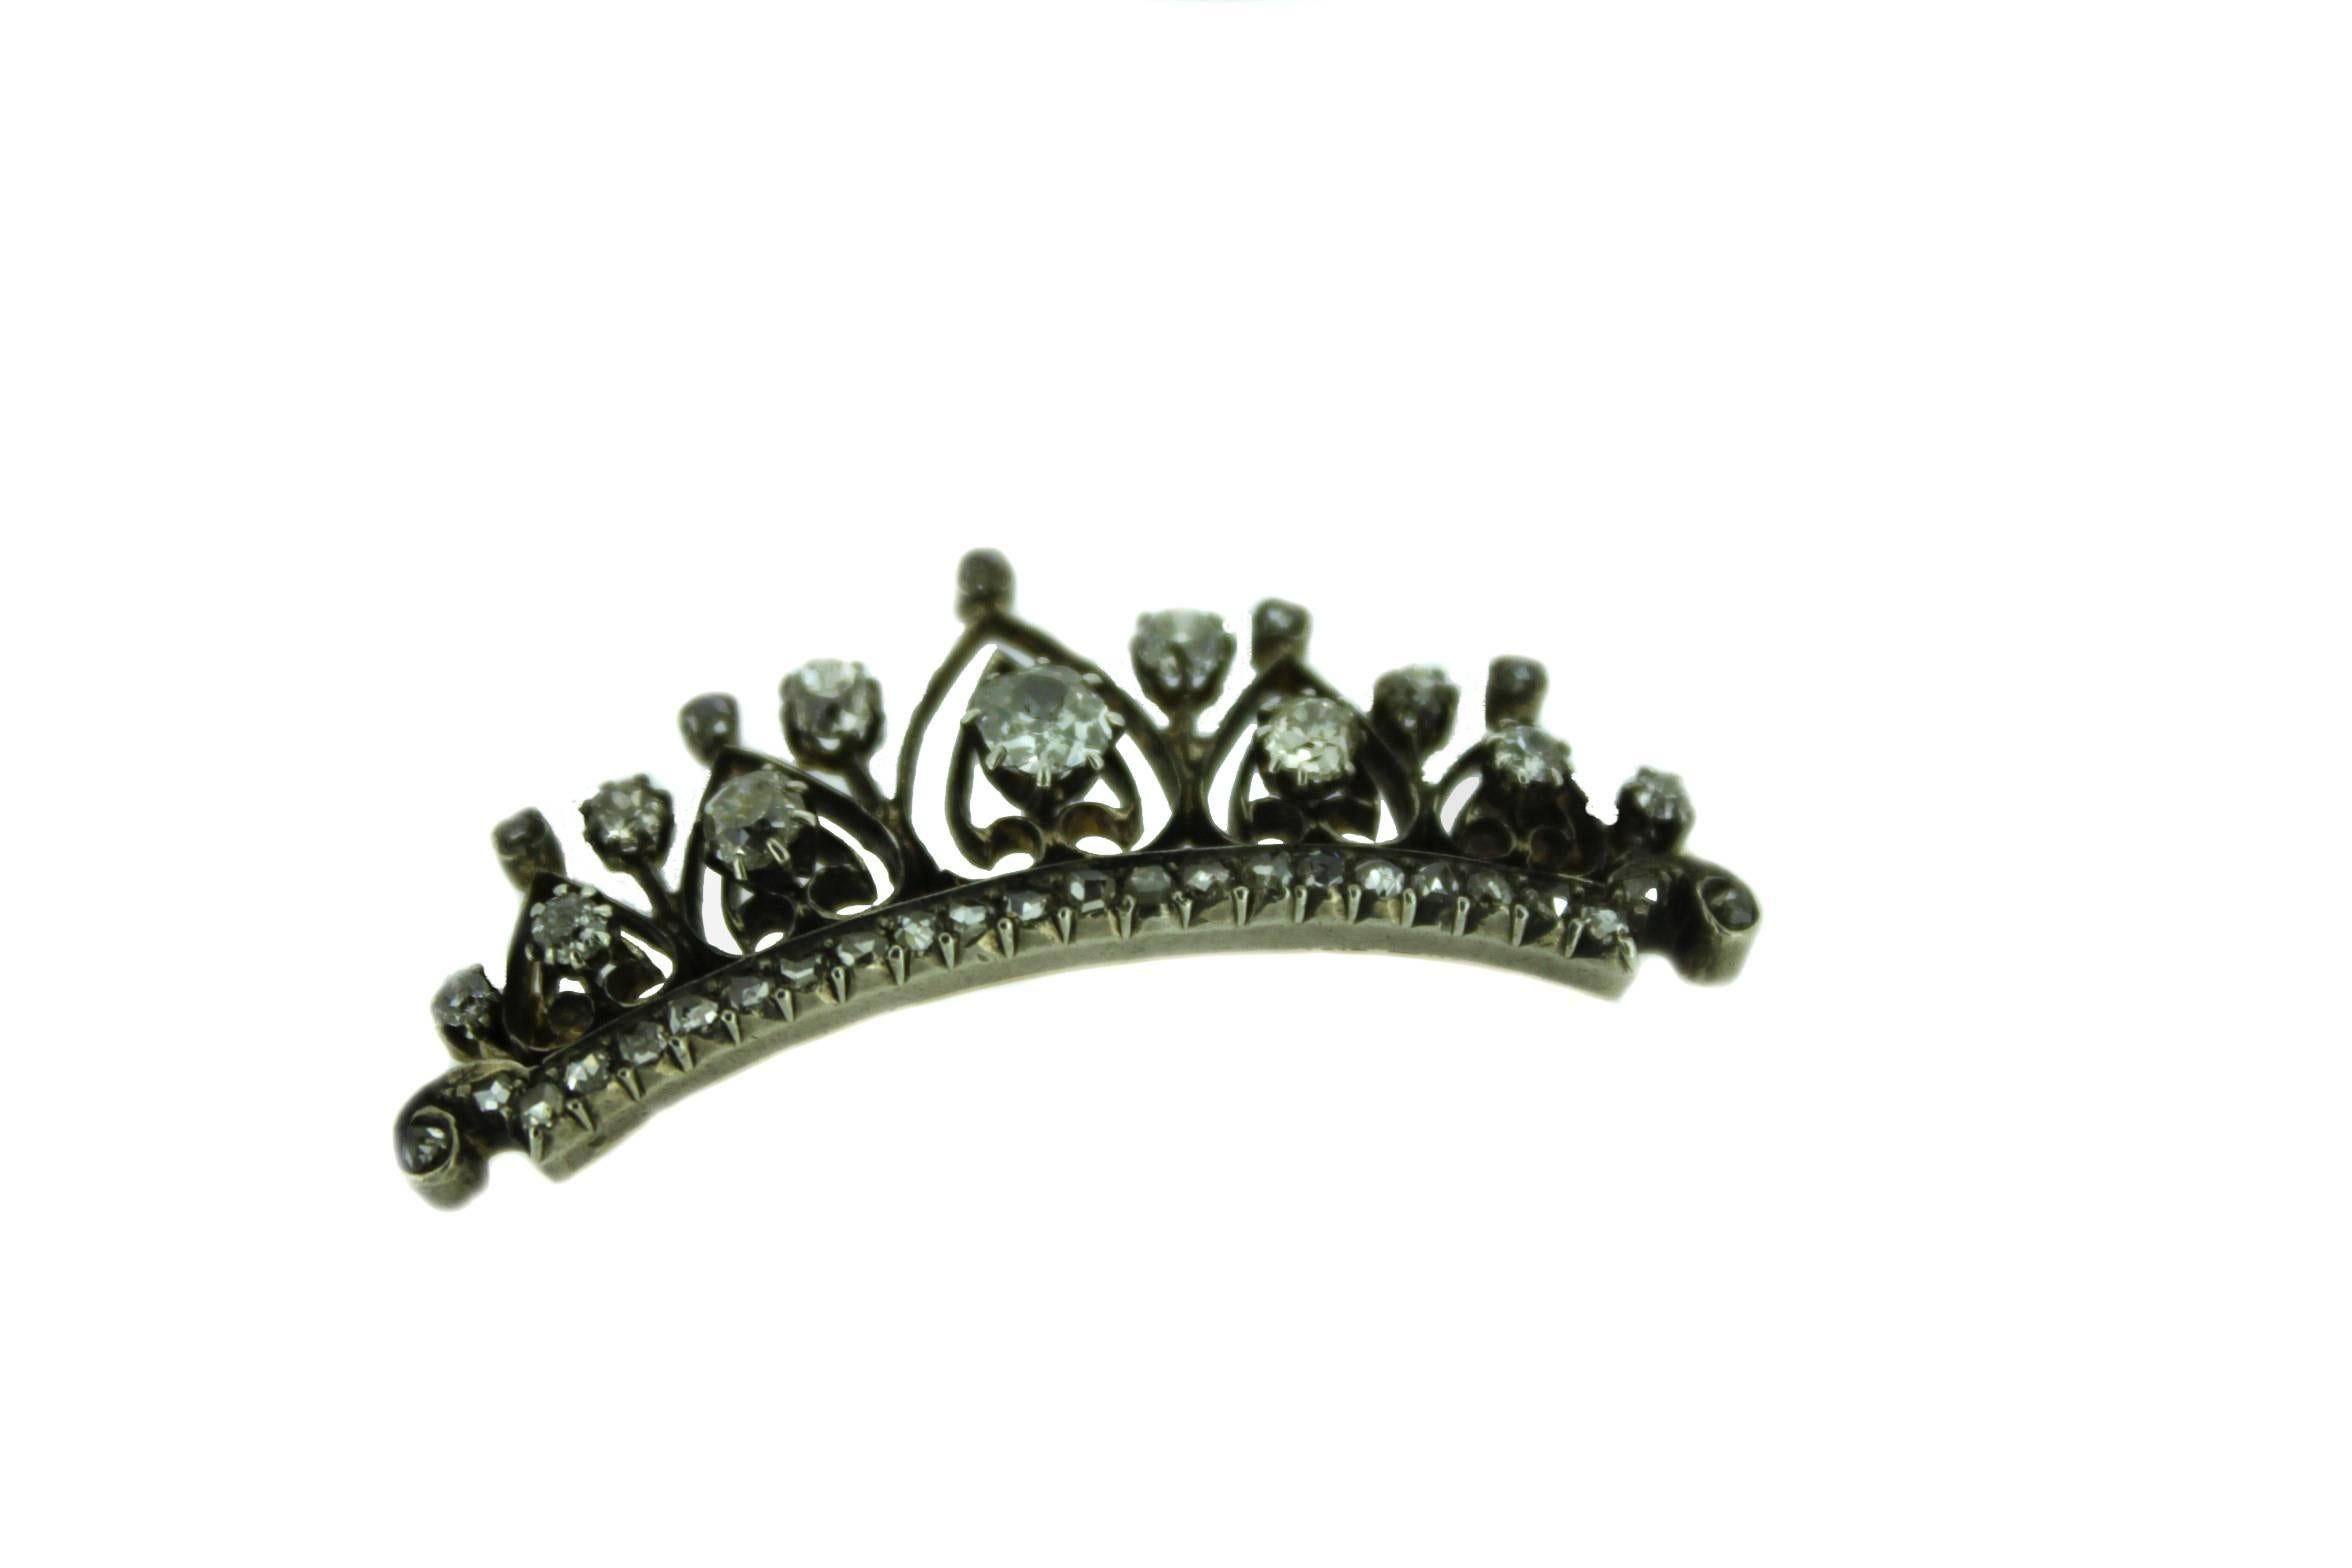 we are offering a time piece like no other,

The Tiara brooche is over 100 years old and decorated around with diamonds to sparkle like royalty!
The diamond are old european cut and are 1.50 carat and decorated around the edges are 24 rose cut